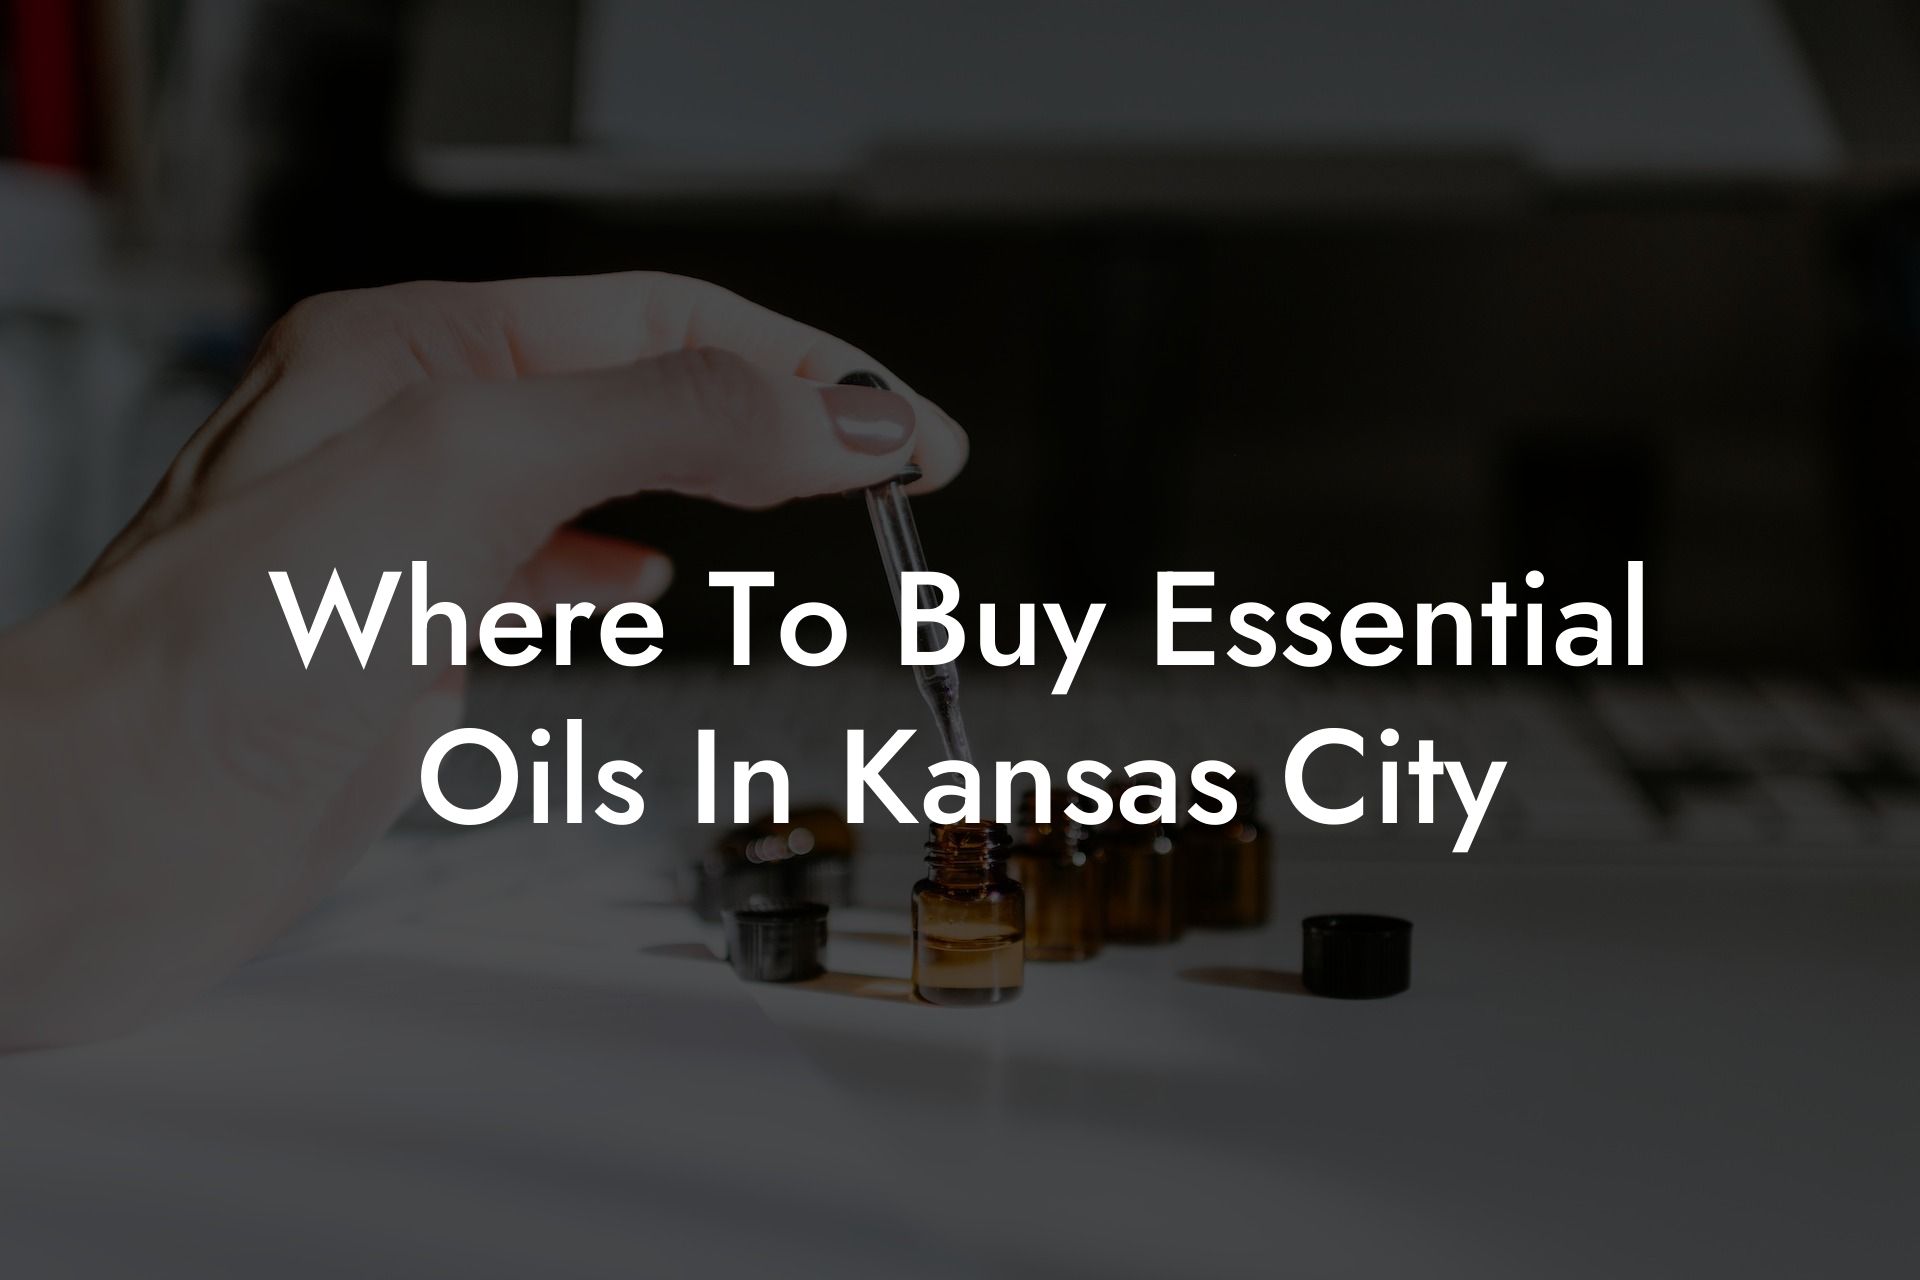 Where To Buy Essential Oils In Kansas City